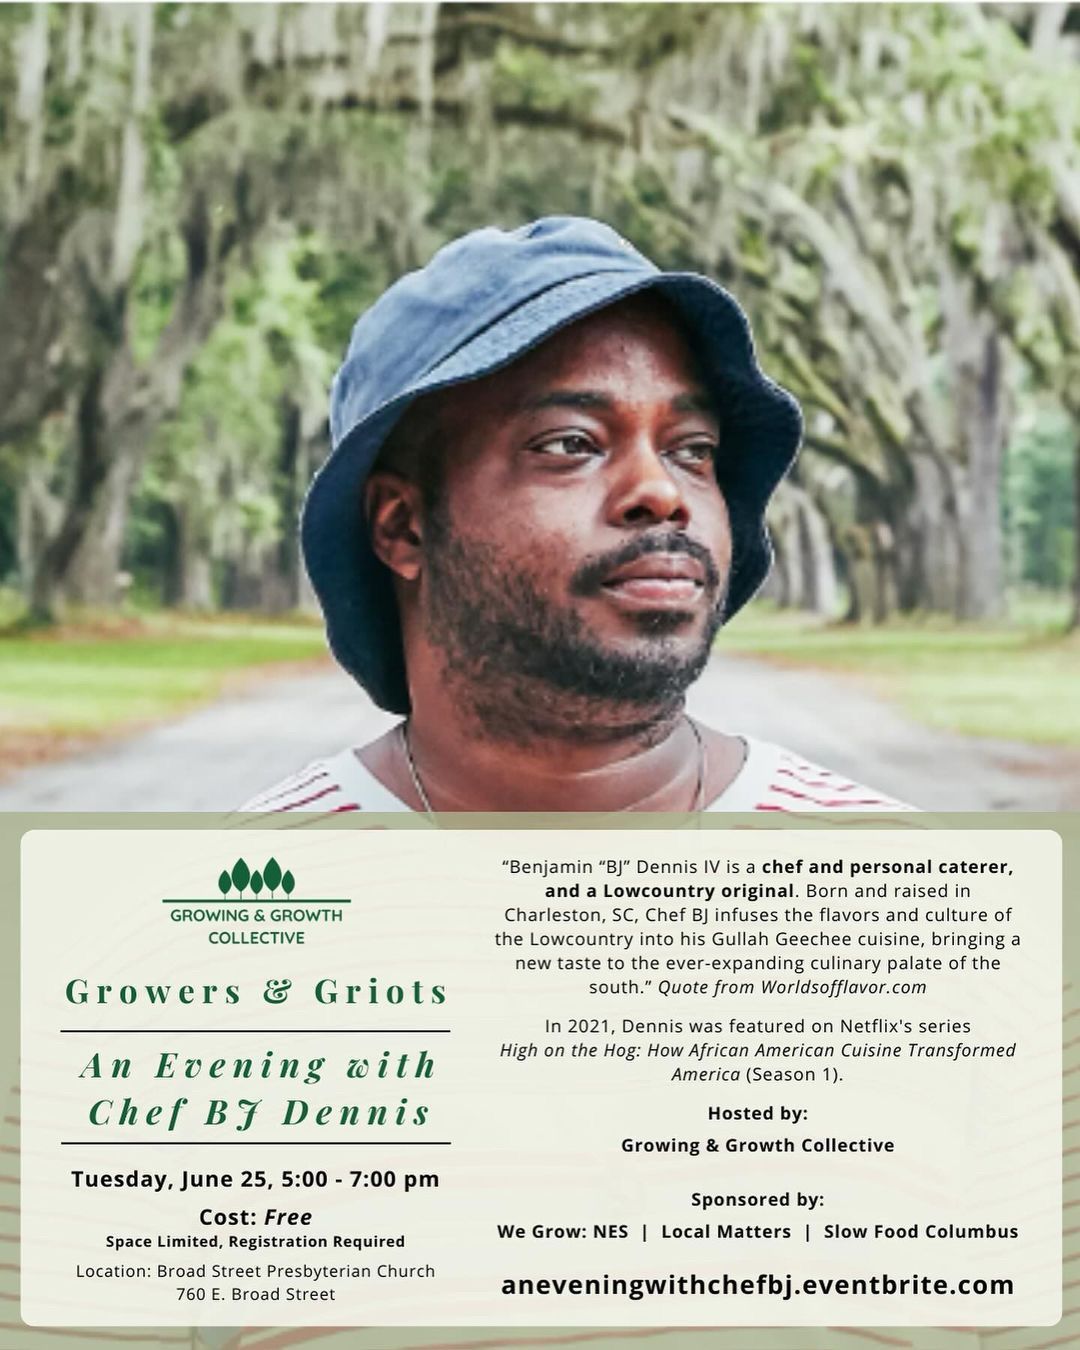 Growers & Griots: An Evening with Chef BJ Dennis